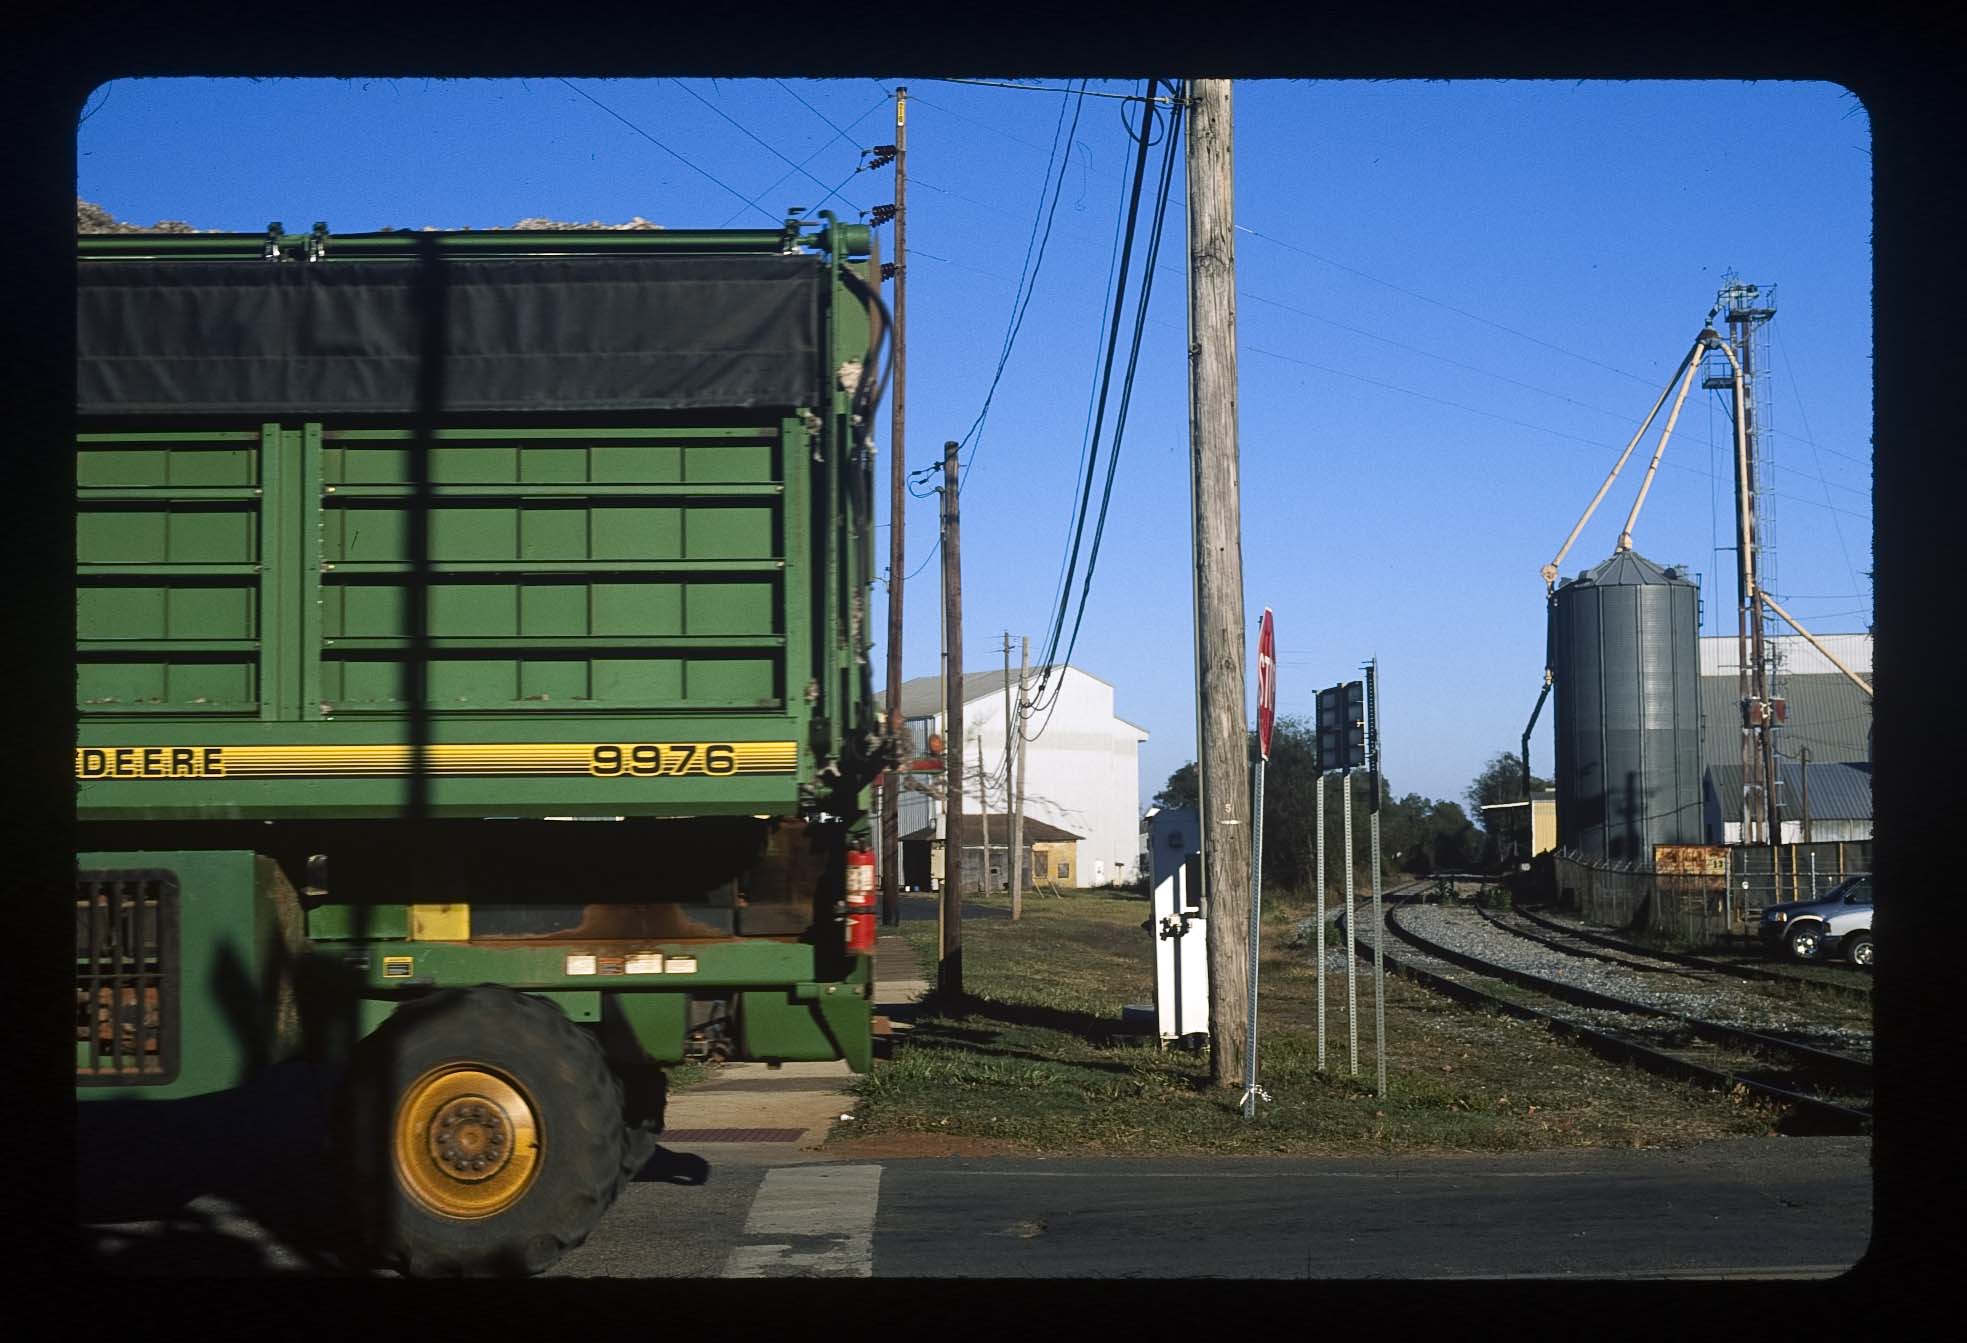 A green truck passing a factory and traintracks